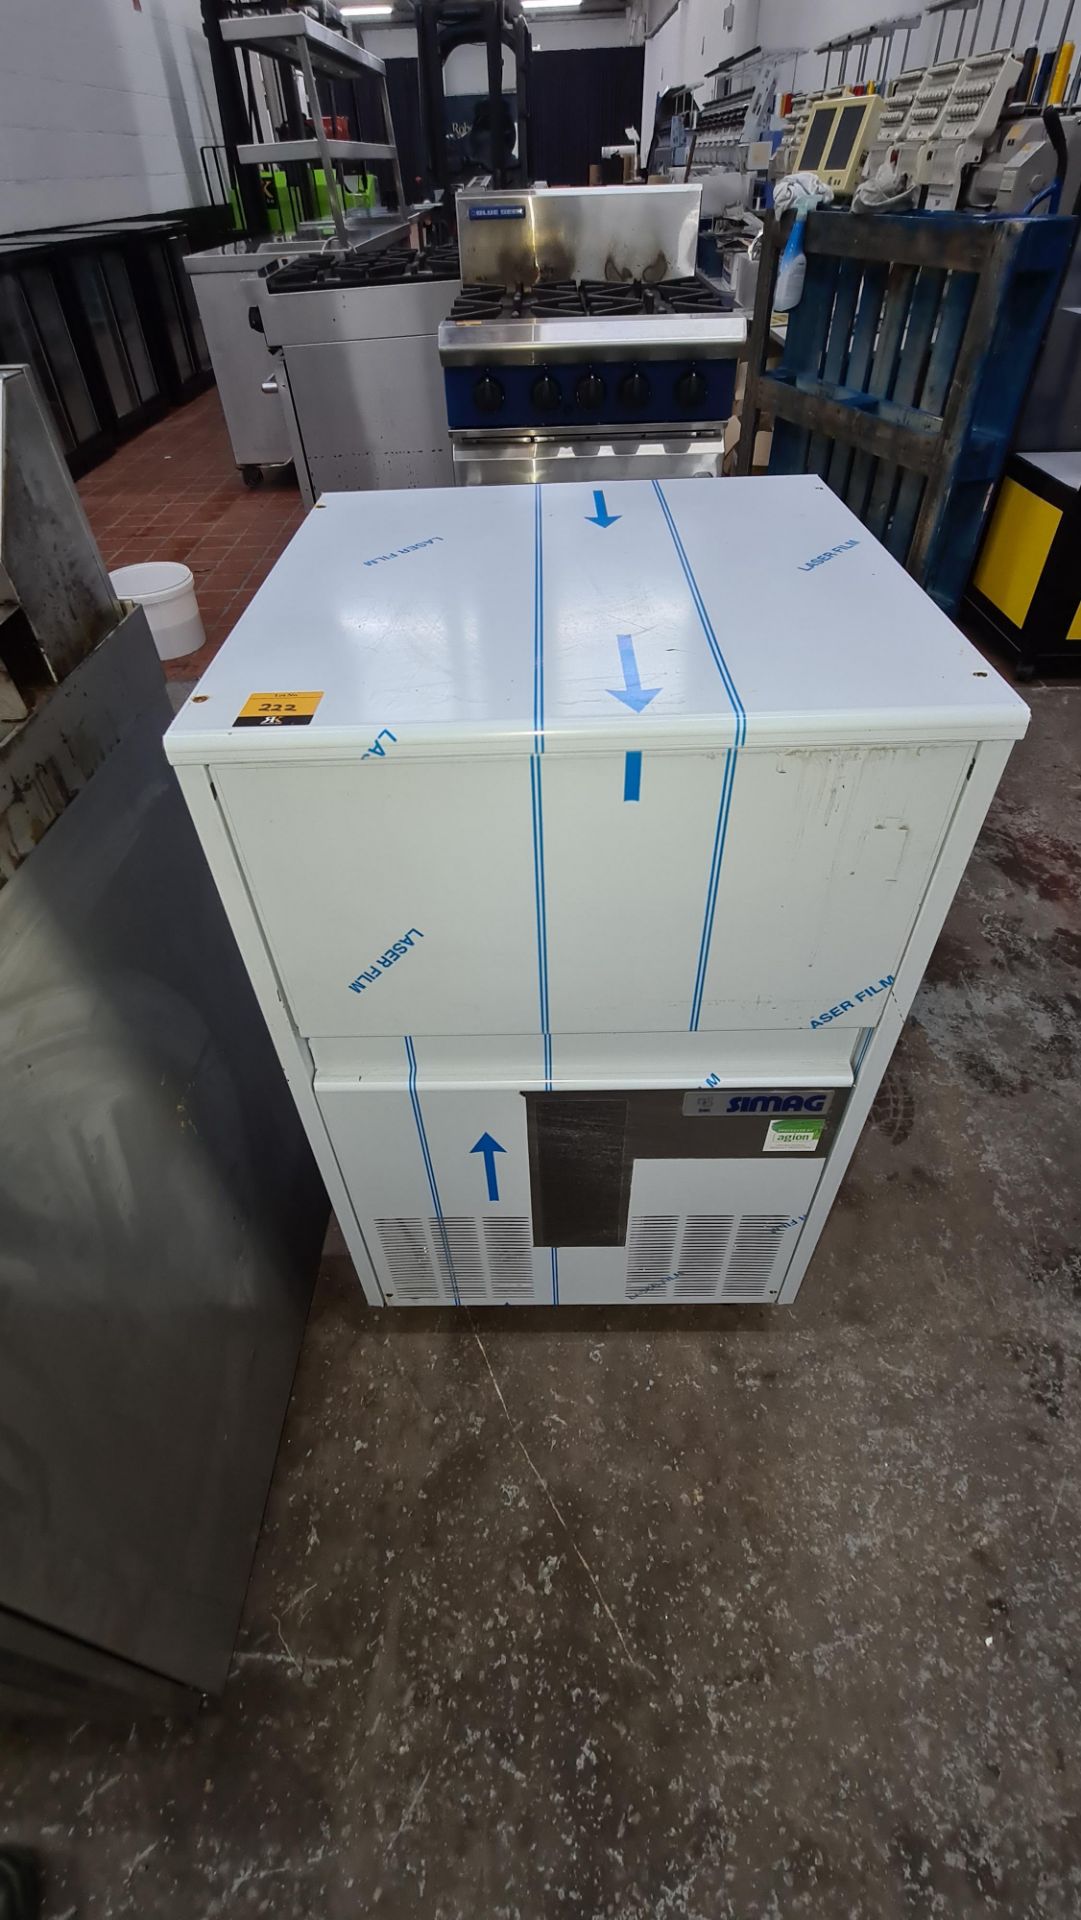 Simag (Scotsman) commercial ice machine model SMI80AS - this lot is still in its original protective